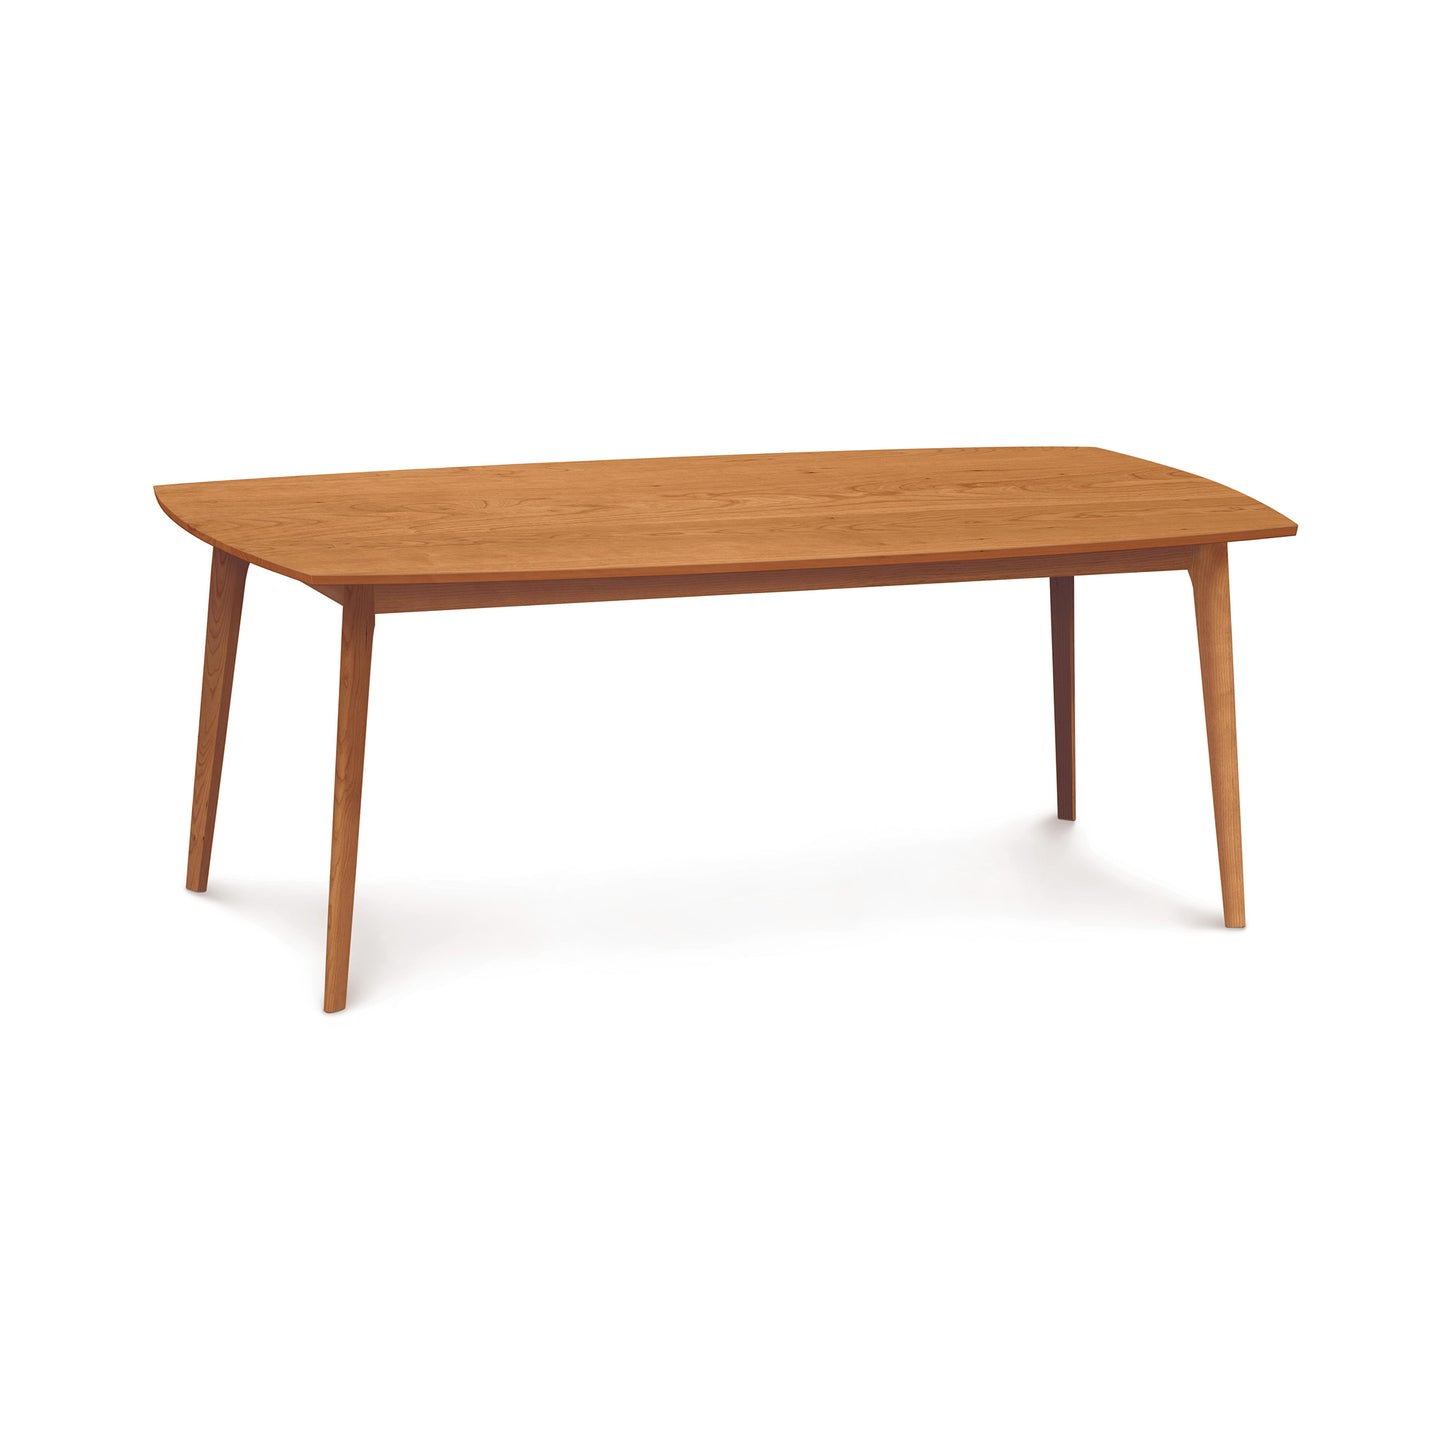 A Copeland Furniture Catalina Solid-Top Table, crafted from sustainably-sourced hardwoods, with a smooth surface and angled legs, isolated on a white background.